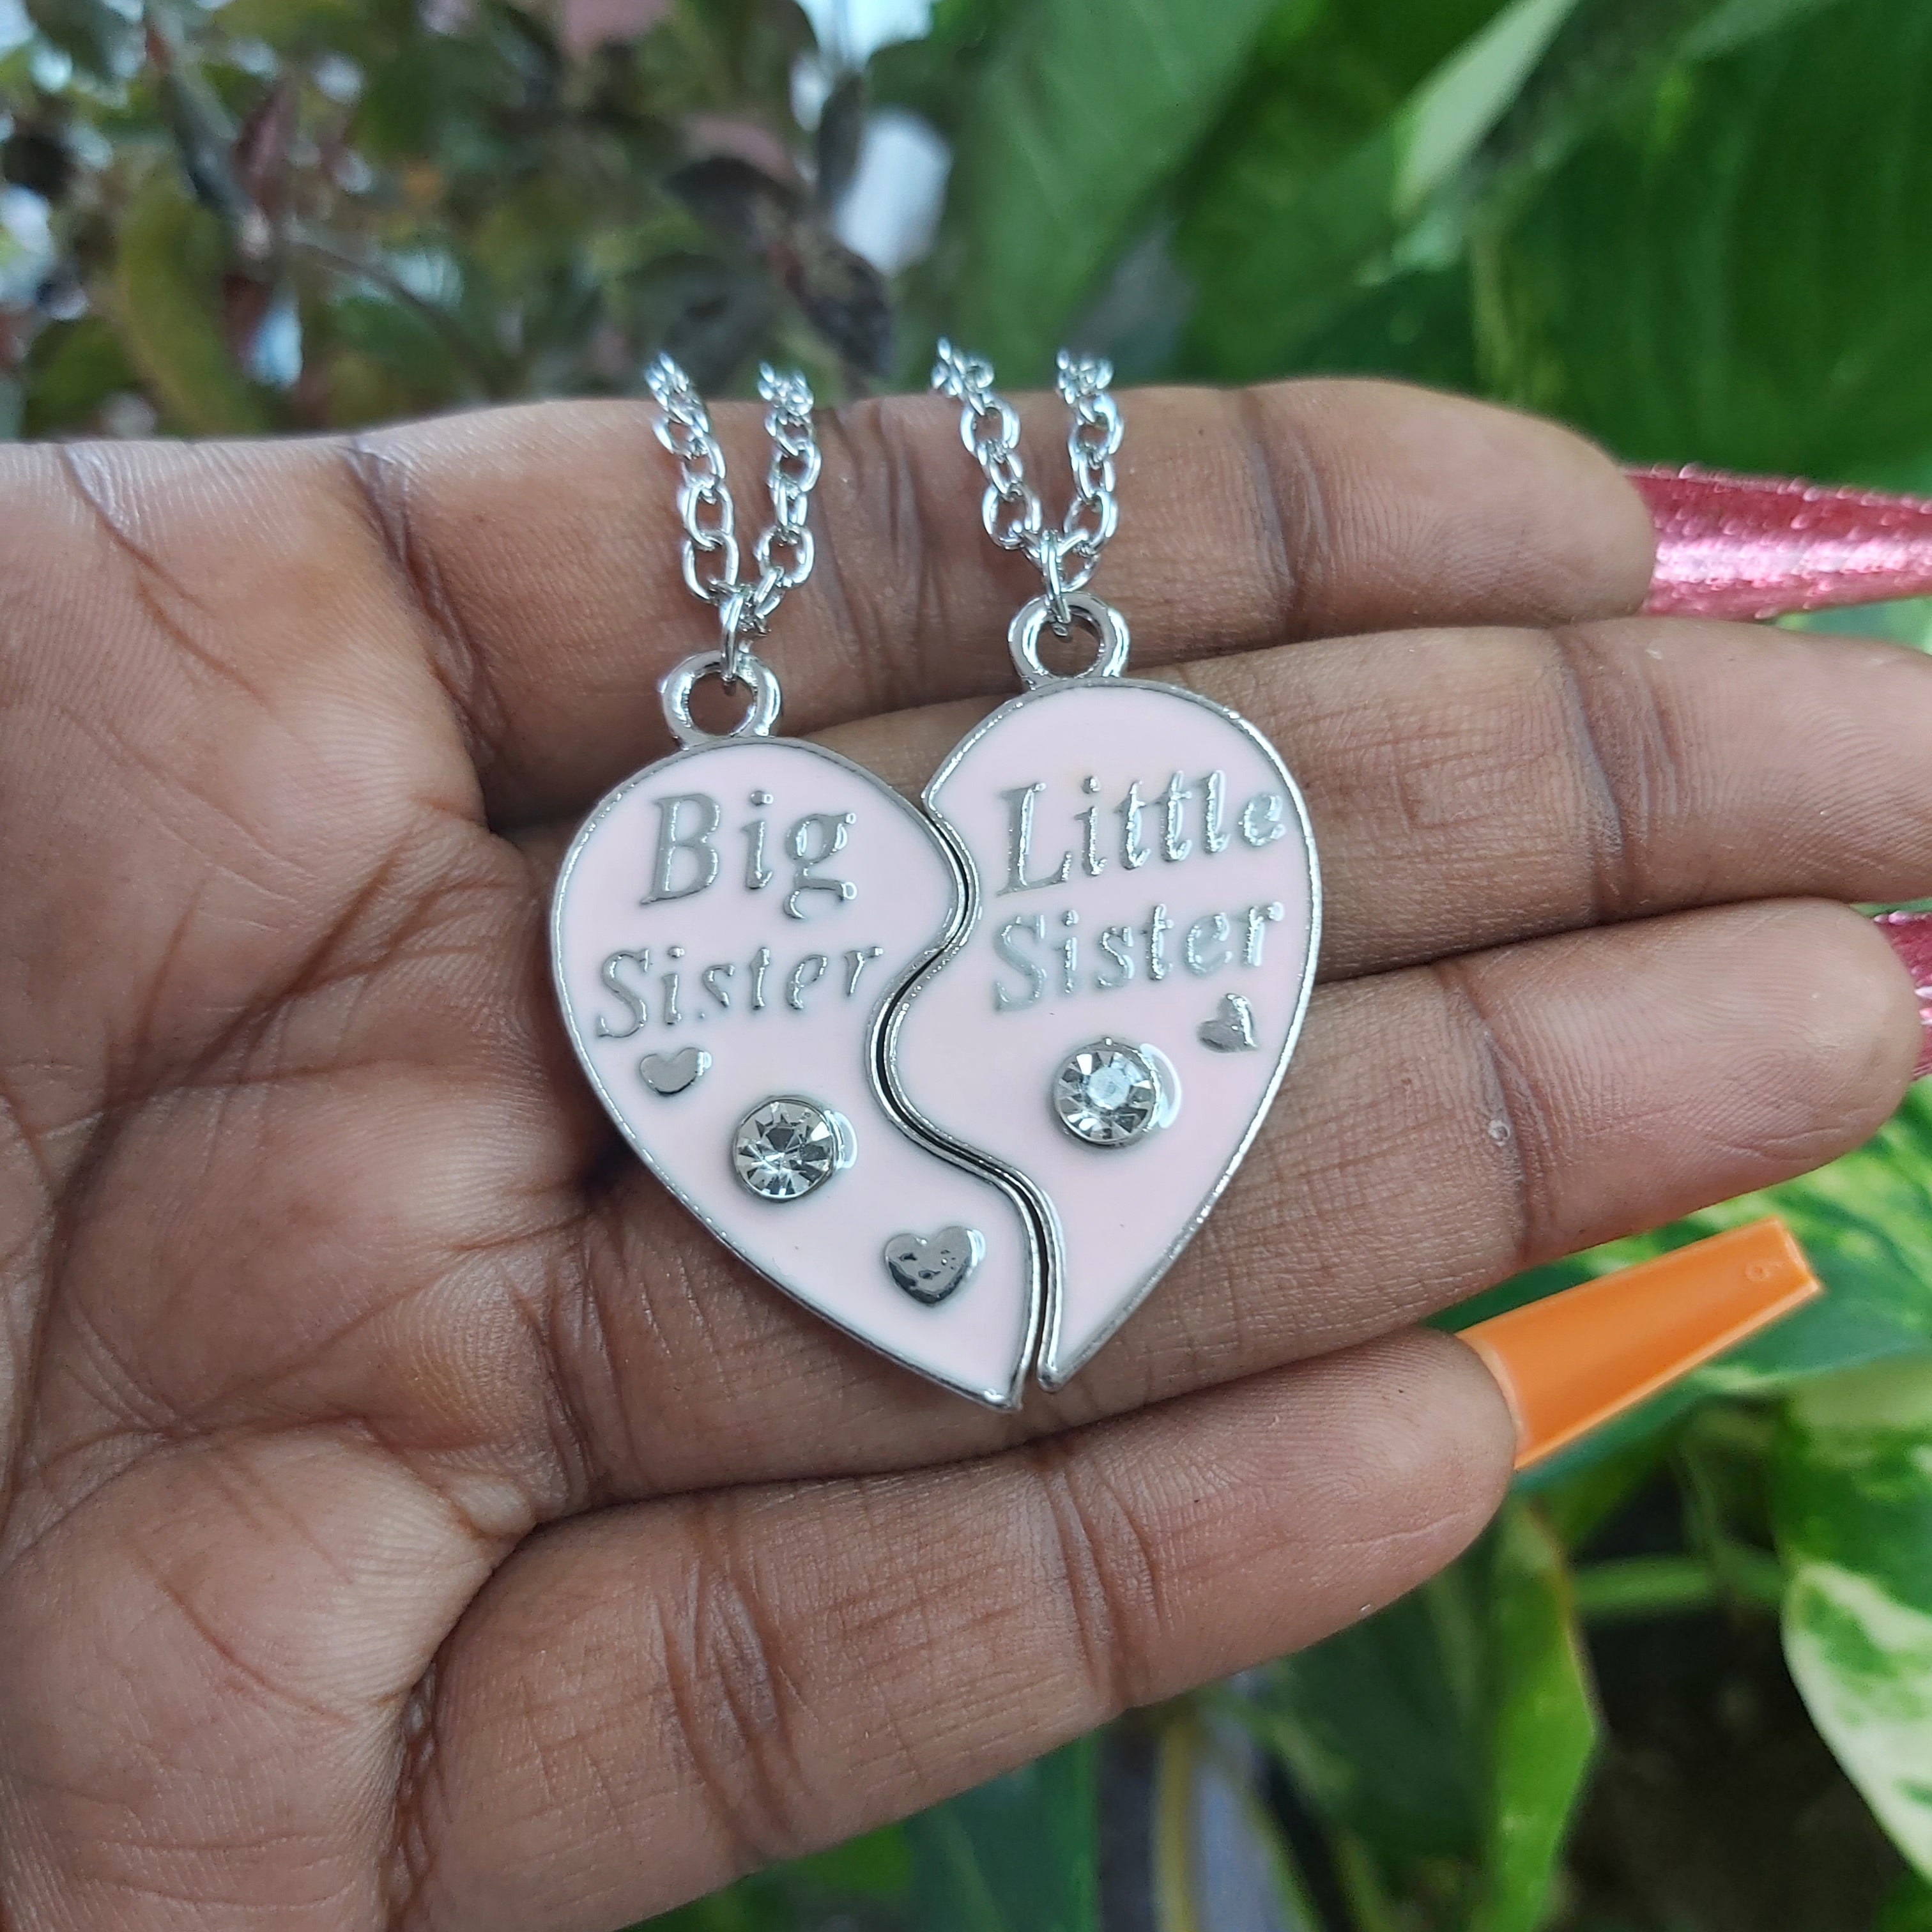 Big/Little Sister Heart Fashion Necklaces